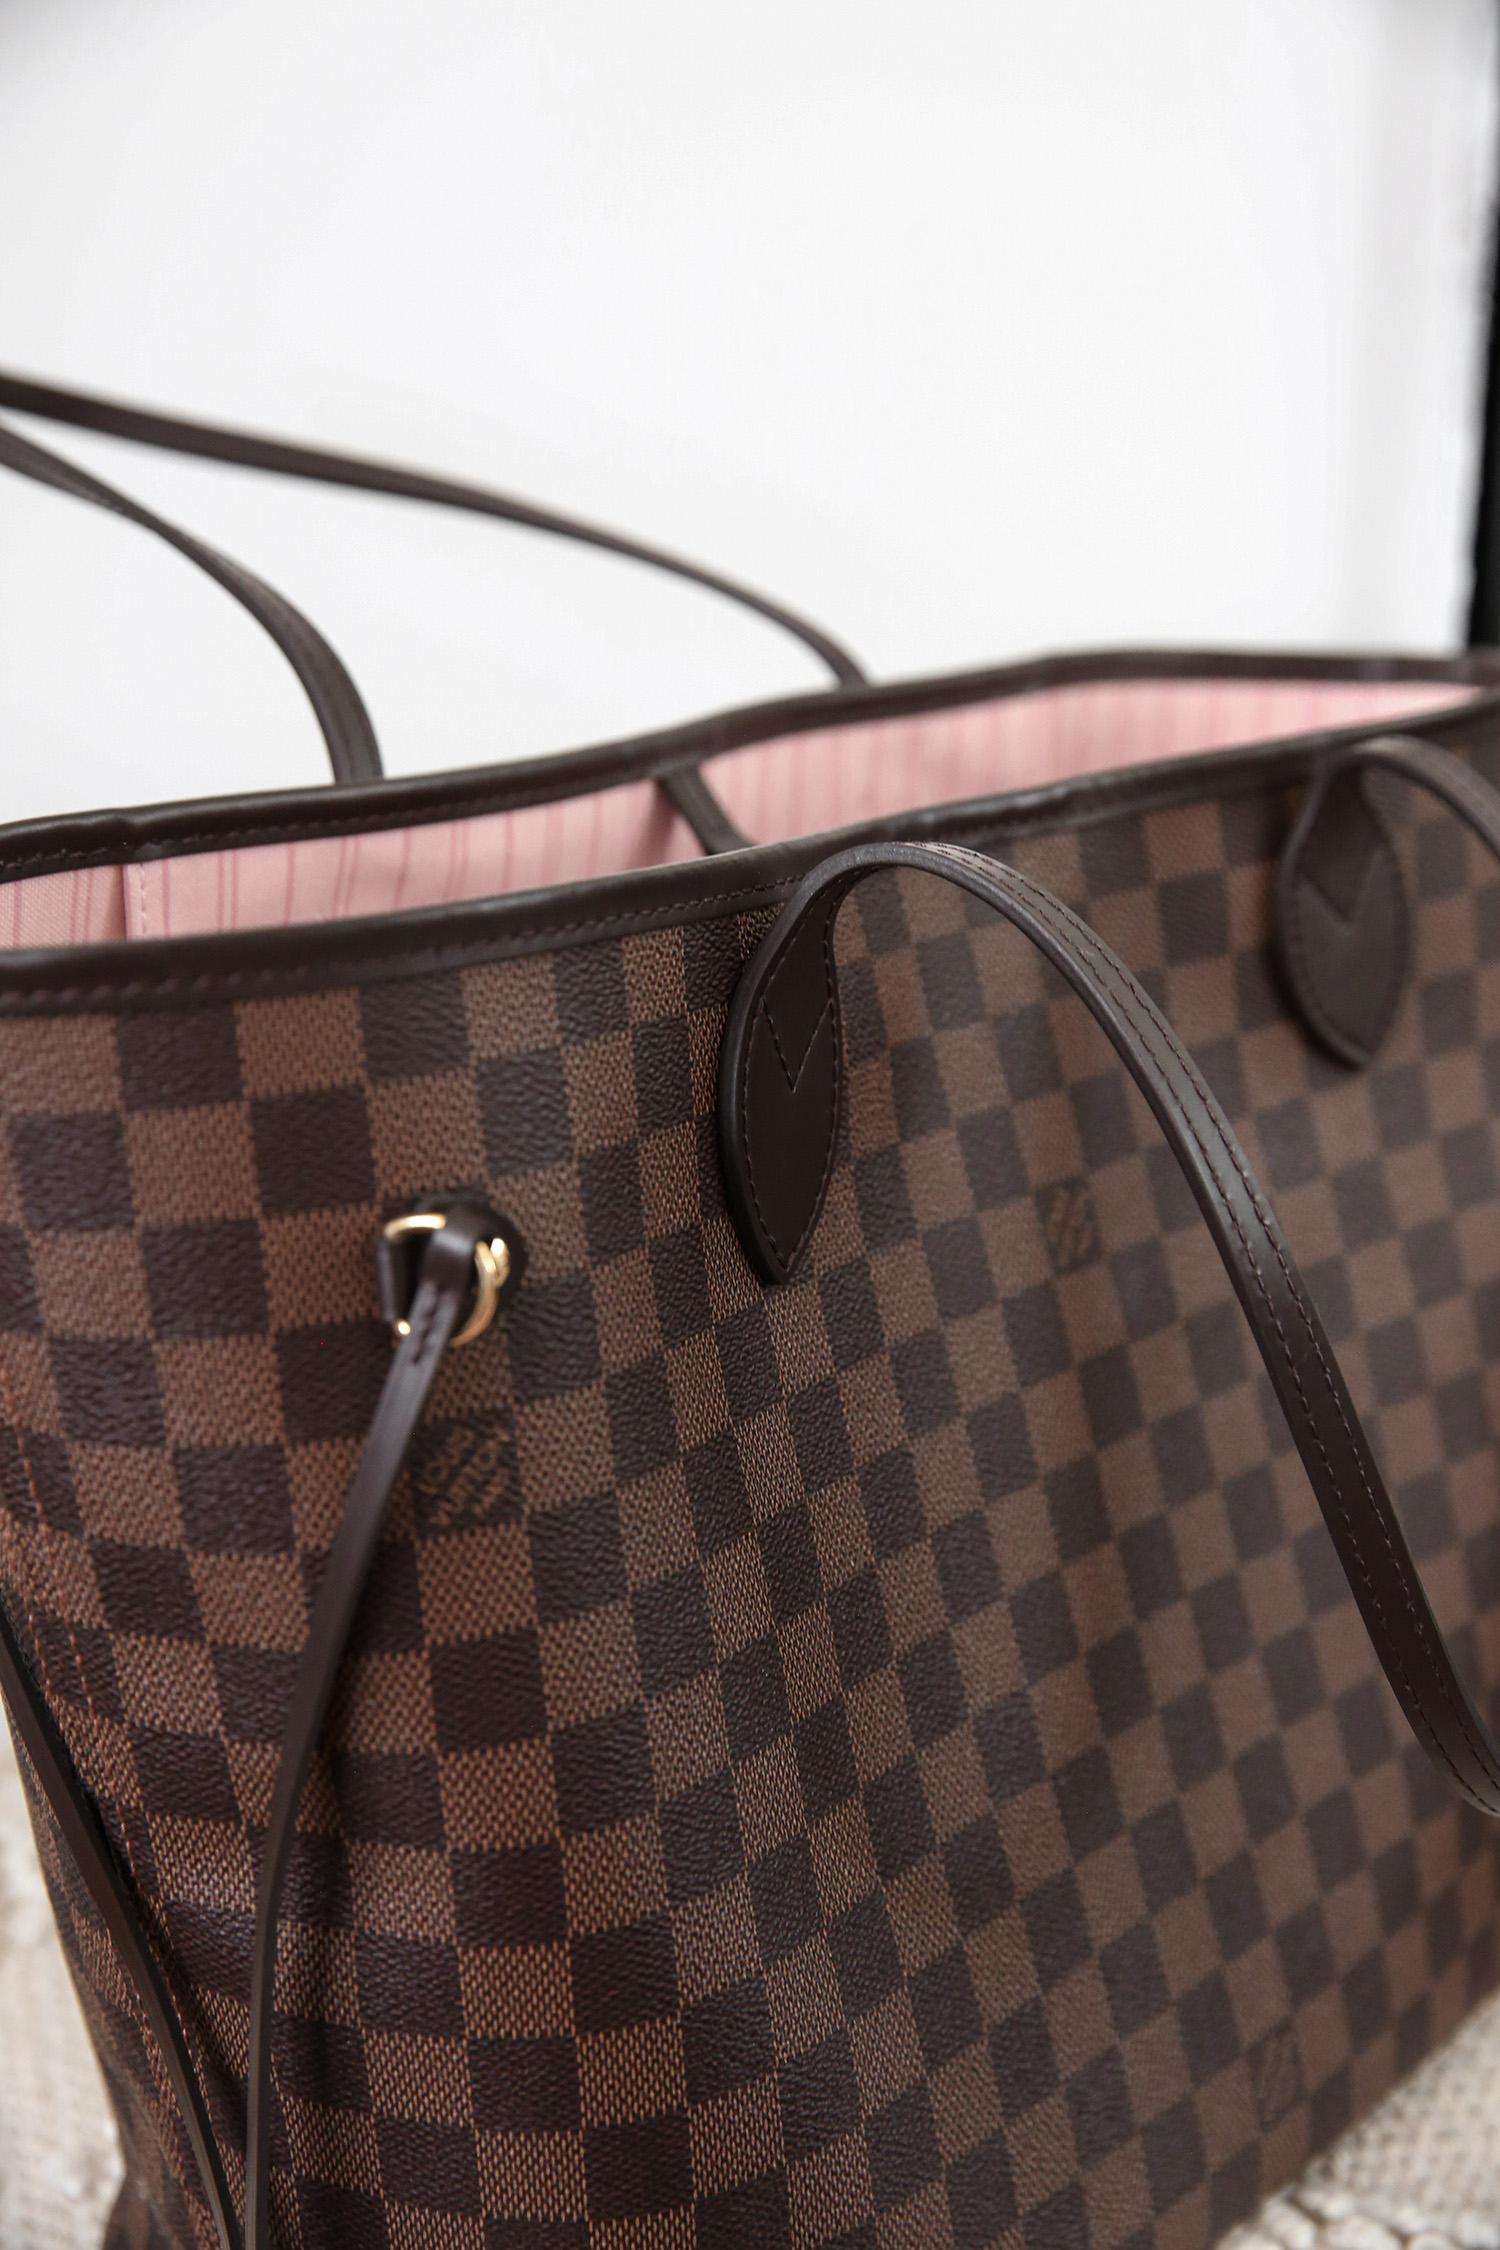 LOUIS VUITTON NEVERFULL MM  REVIEWCHAT  YouTube